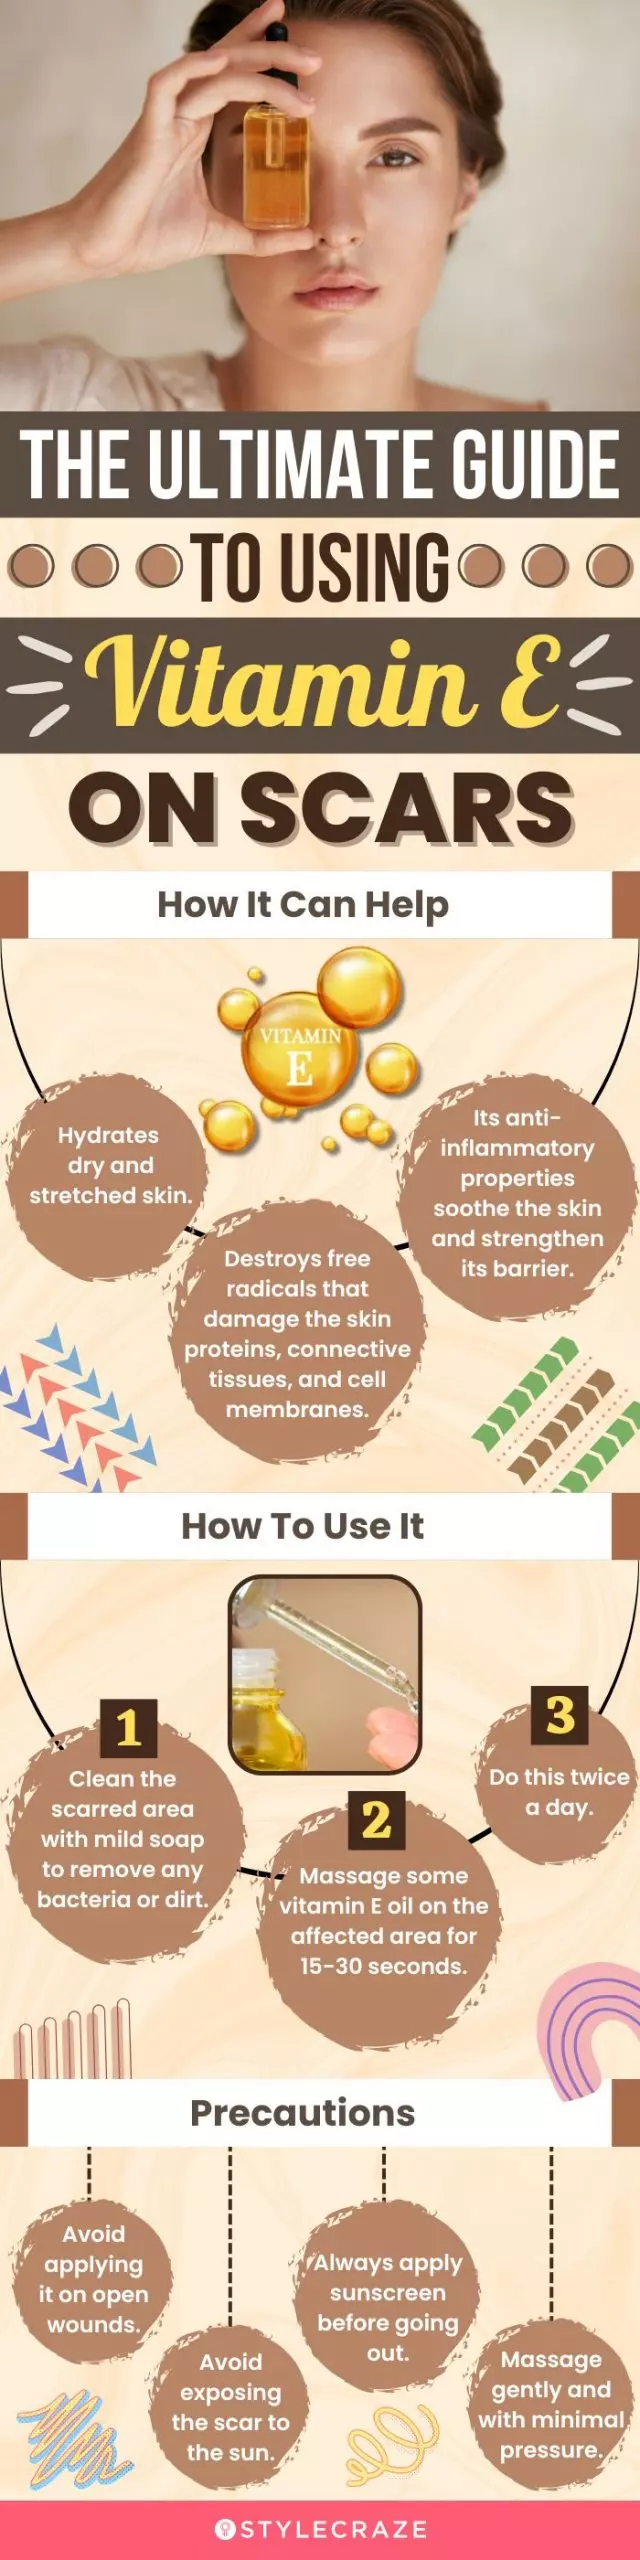 the ultimate guide to using vitamin e for scars (infographic)